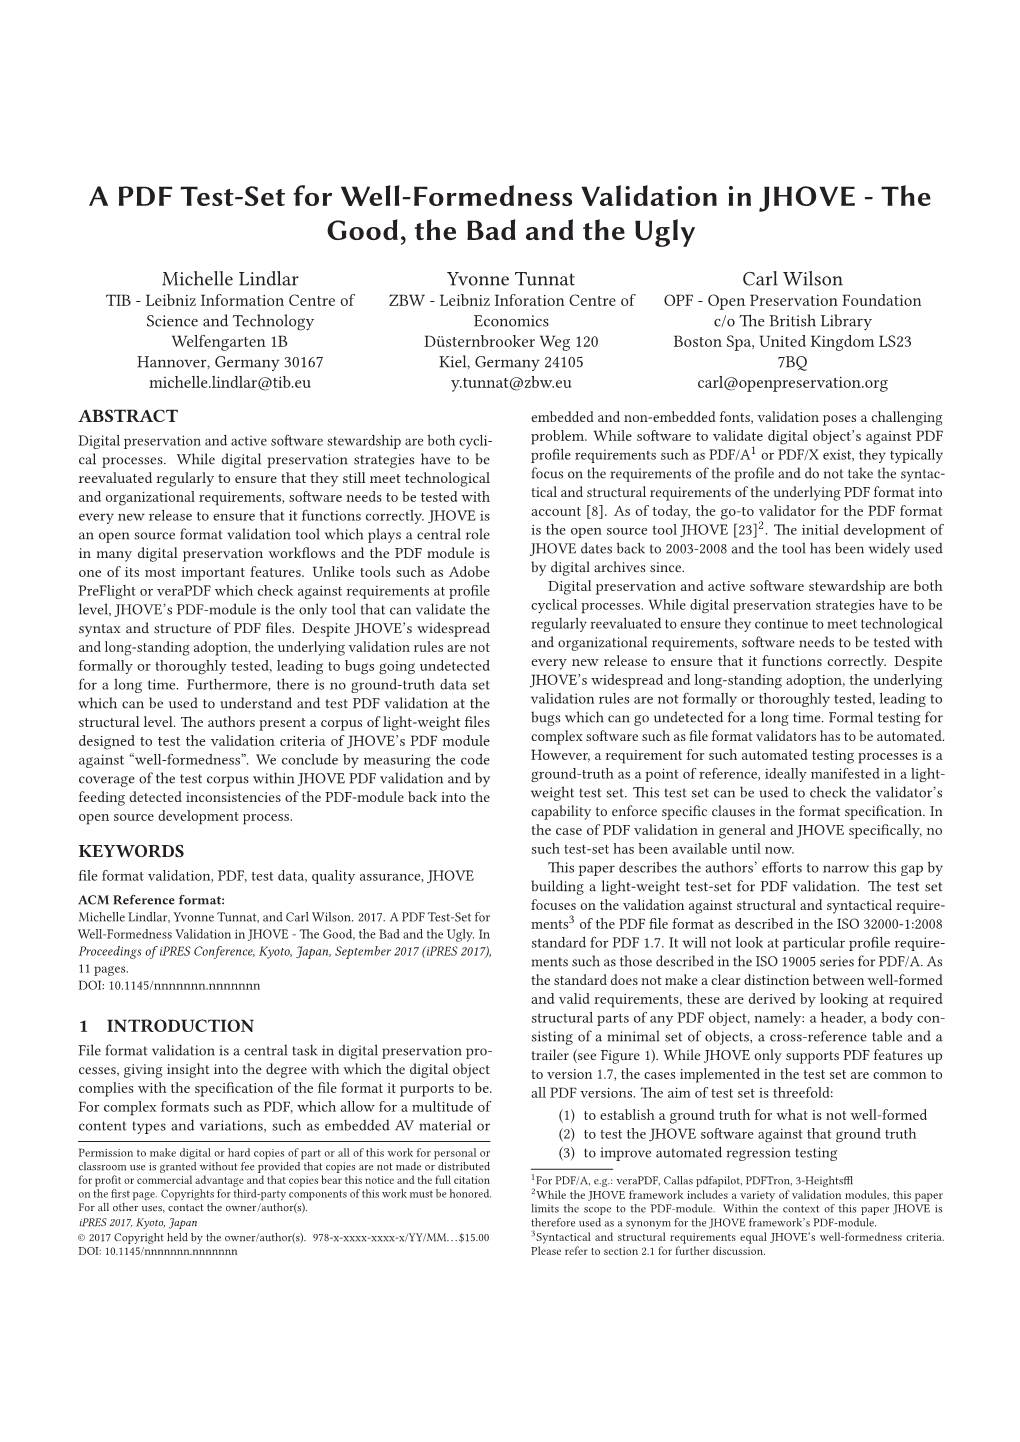 A PDF Test-Set for Well-Formedness Validation in JHOVE - the Good, the Bad and the Ugly